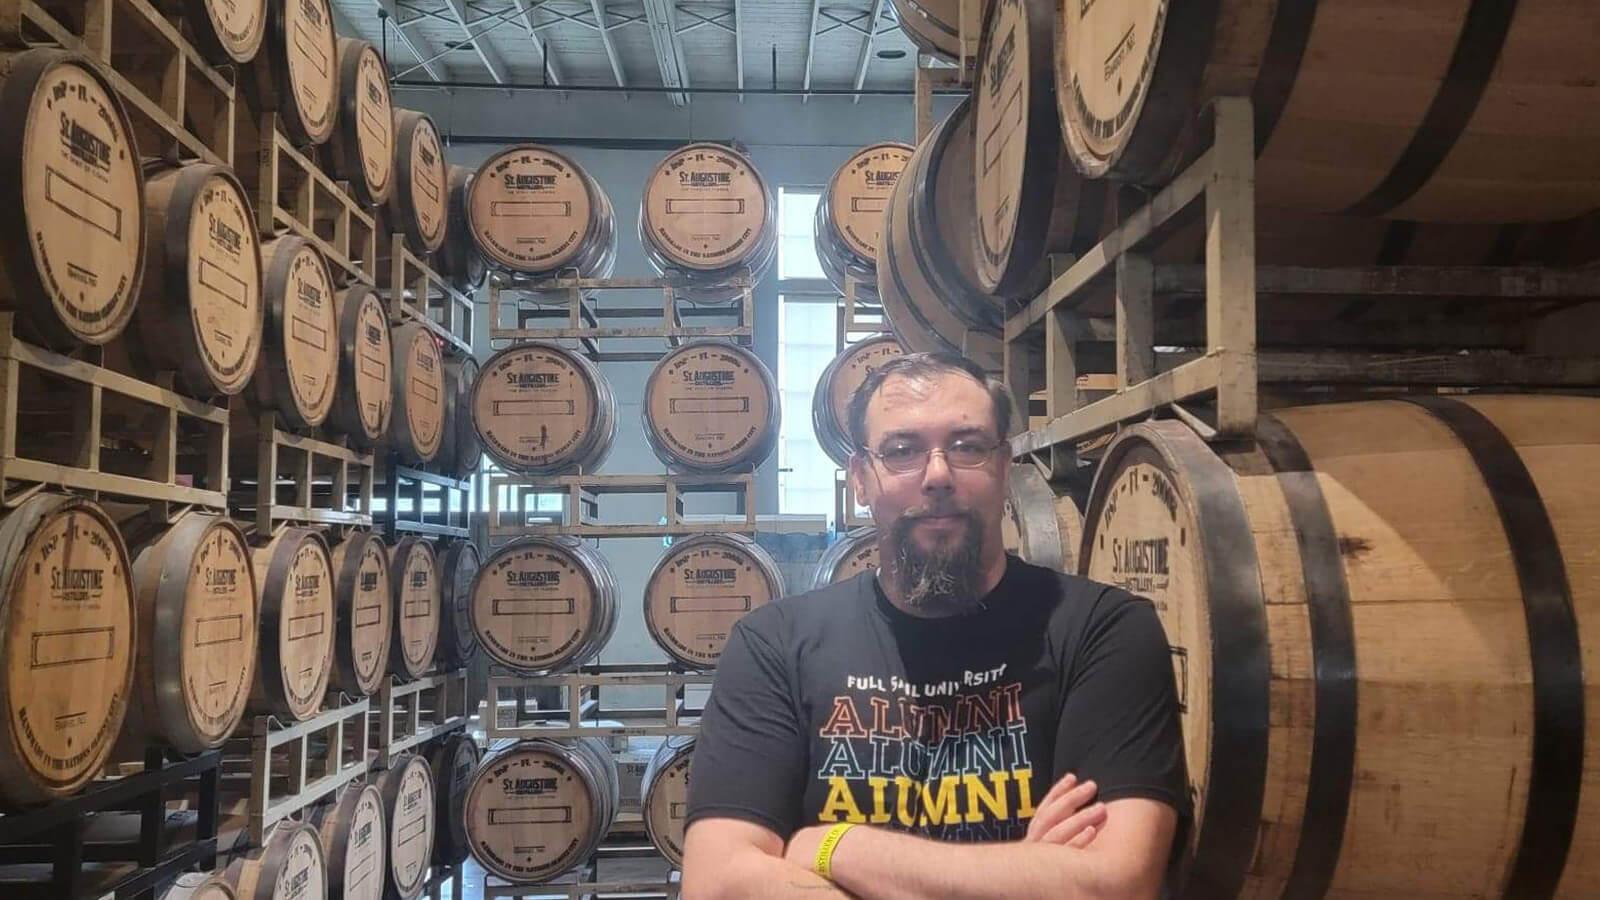 Daniel Vanallen sits in a chair at St. Augustine Distillery Co. He is smiling and wearing a Full Sail Alumni shirt.